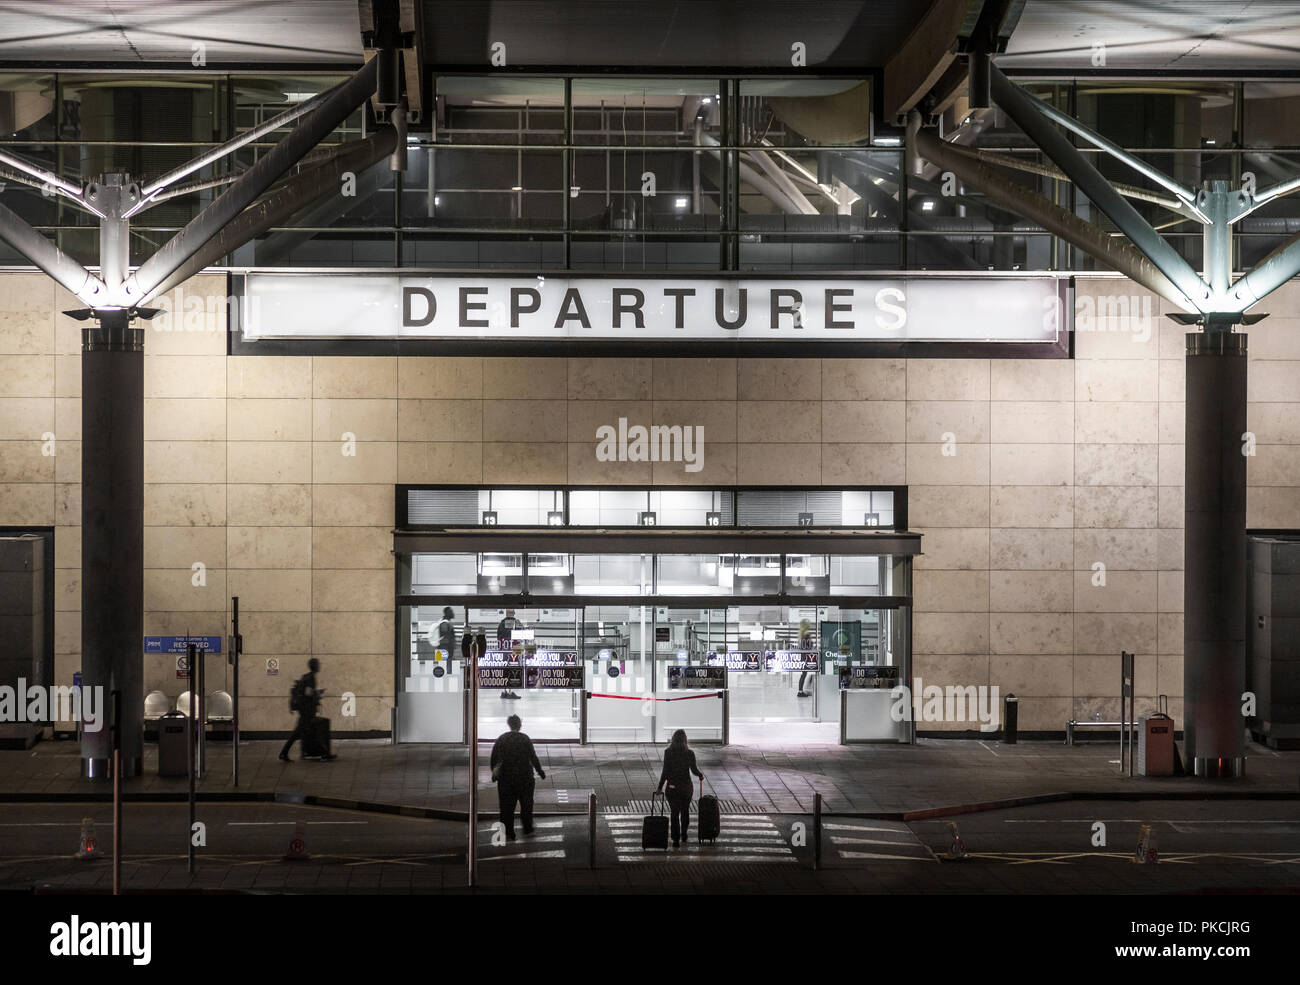 Cork, Ireland. 26th August 2017. Passengers begin to arrive at the departures entrance in Cork Airport for their early morning flights to various dest Stock Photo